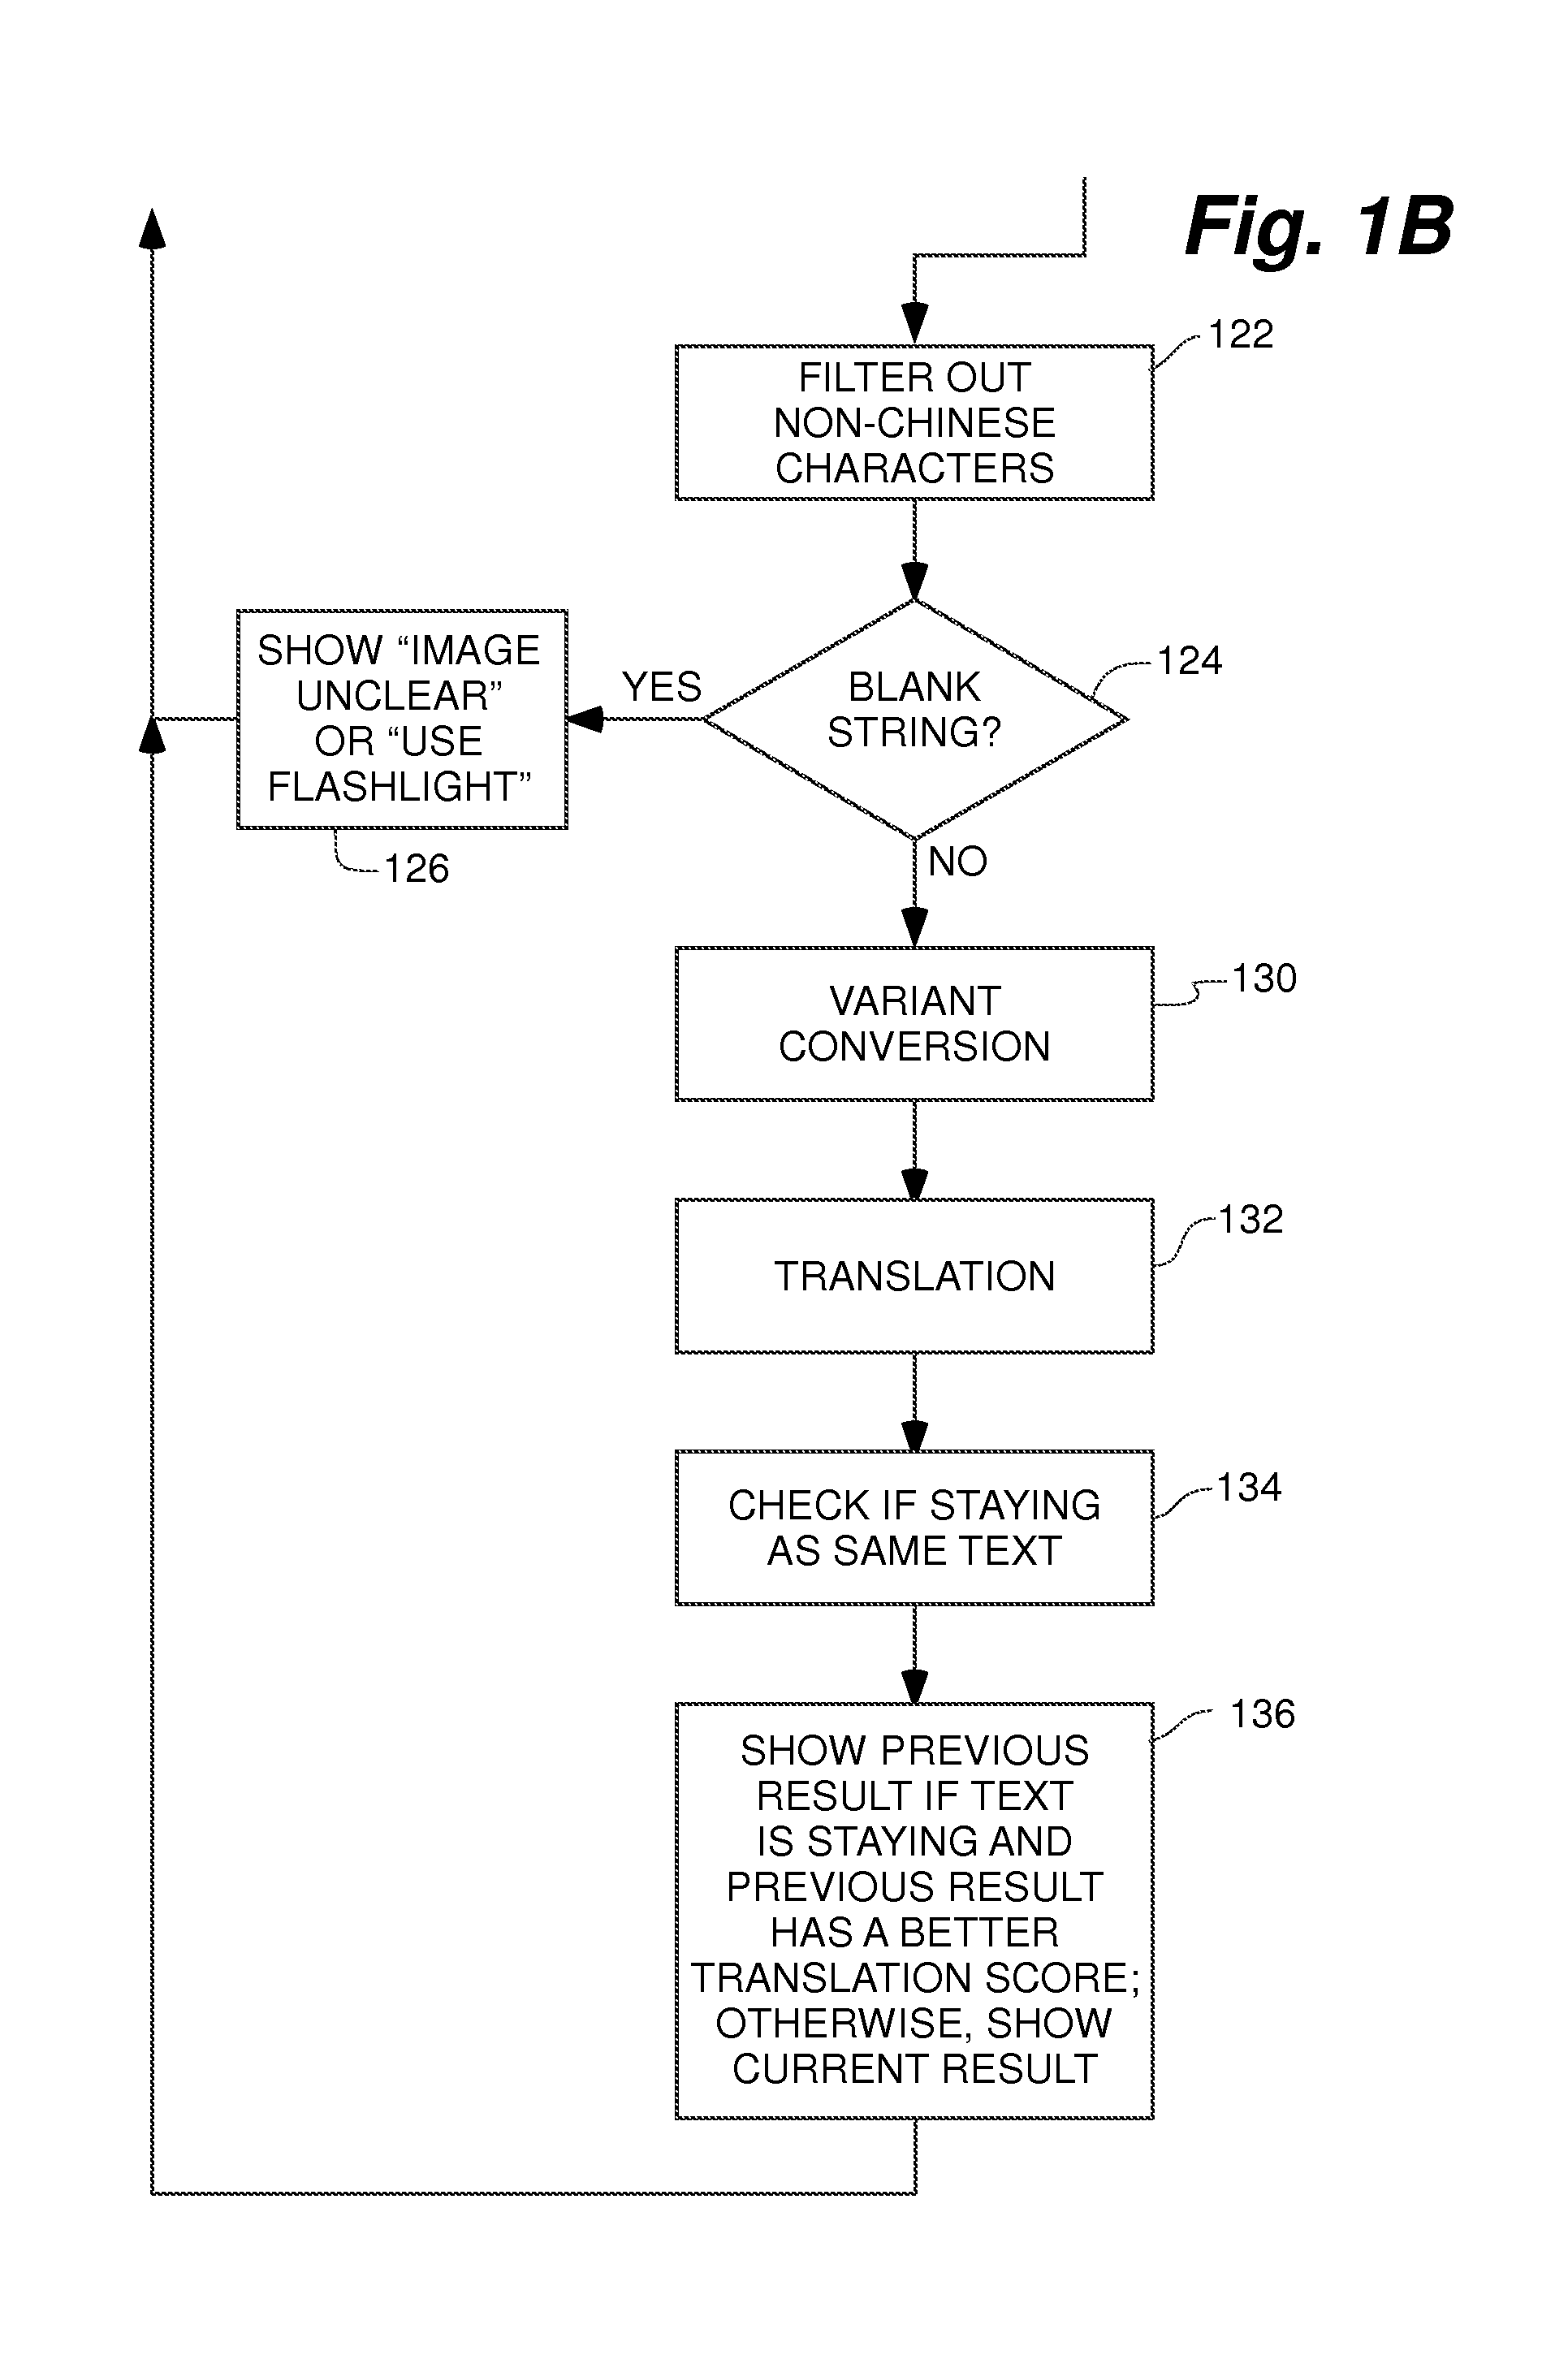 Systems and methods for determining and displaying multi-line foreign language translations in real time on mobile devices